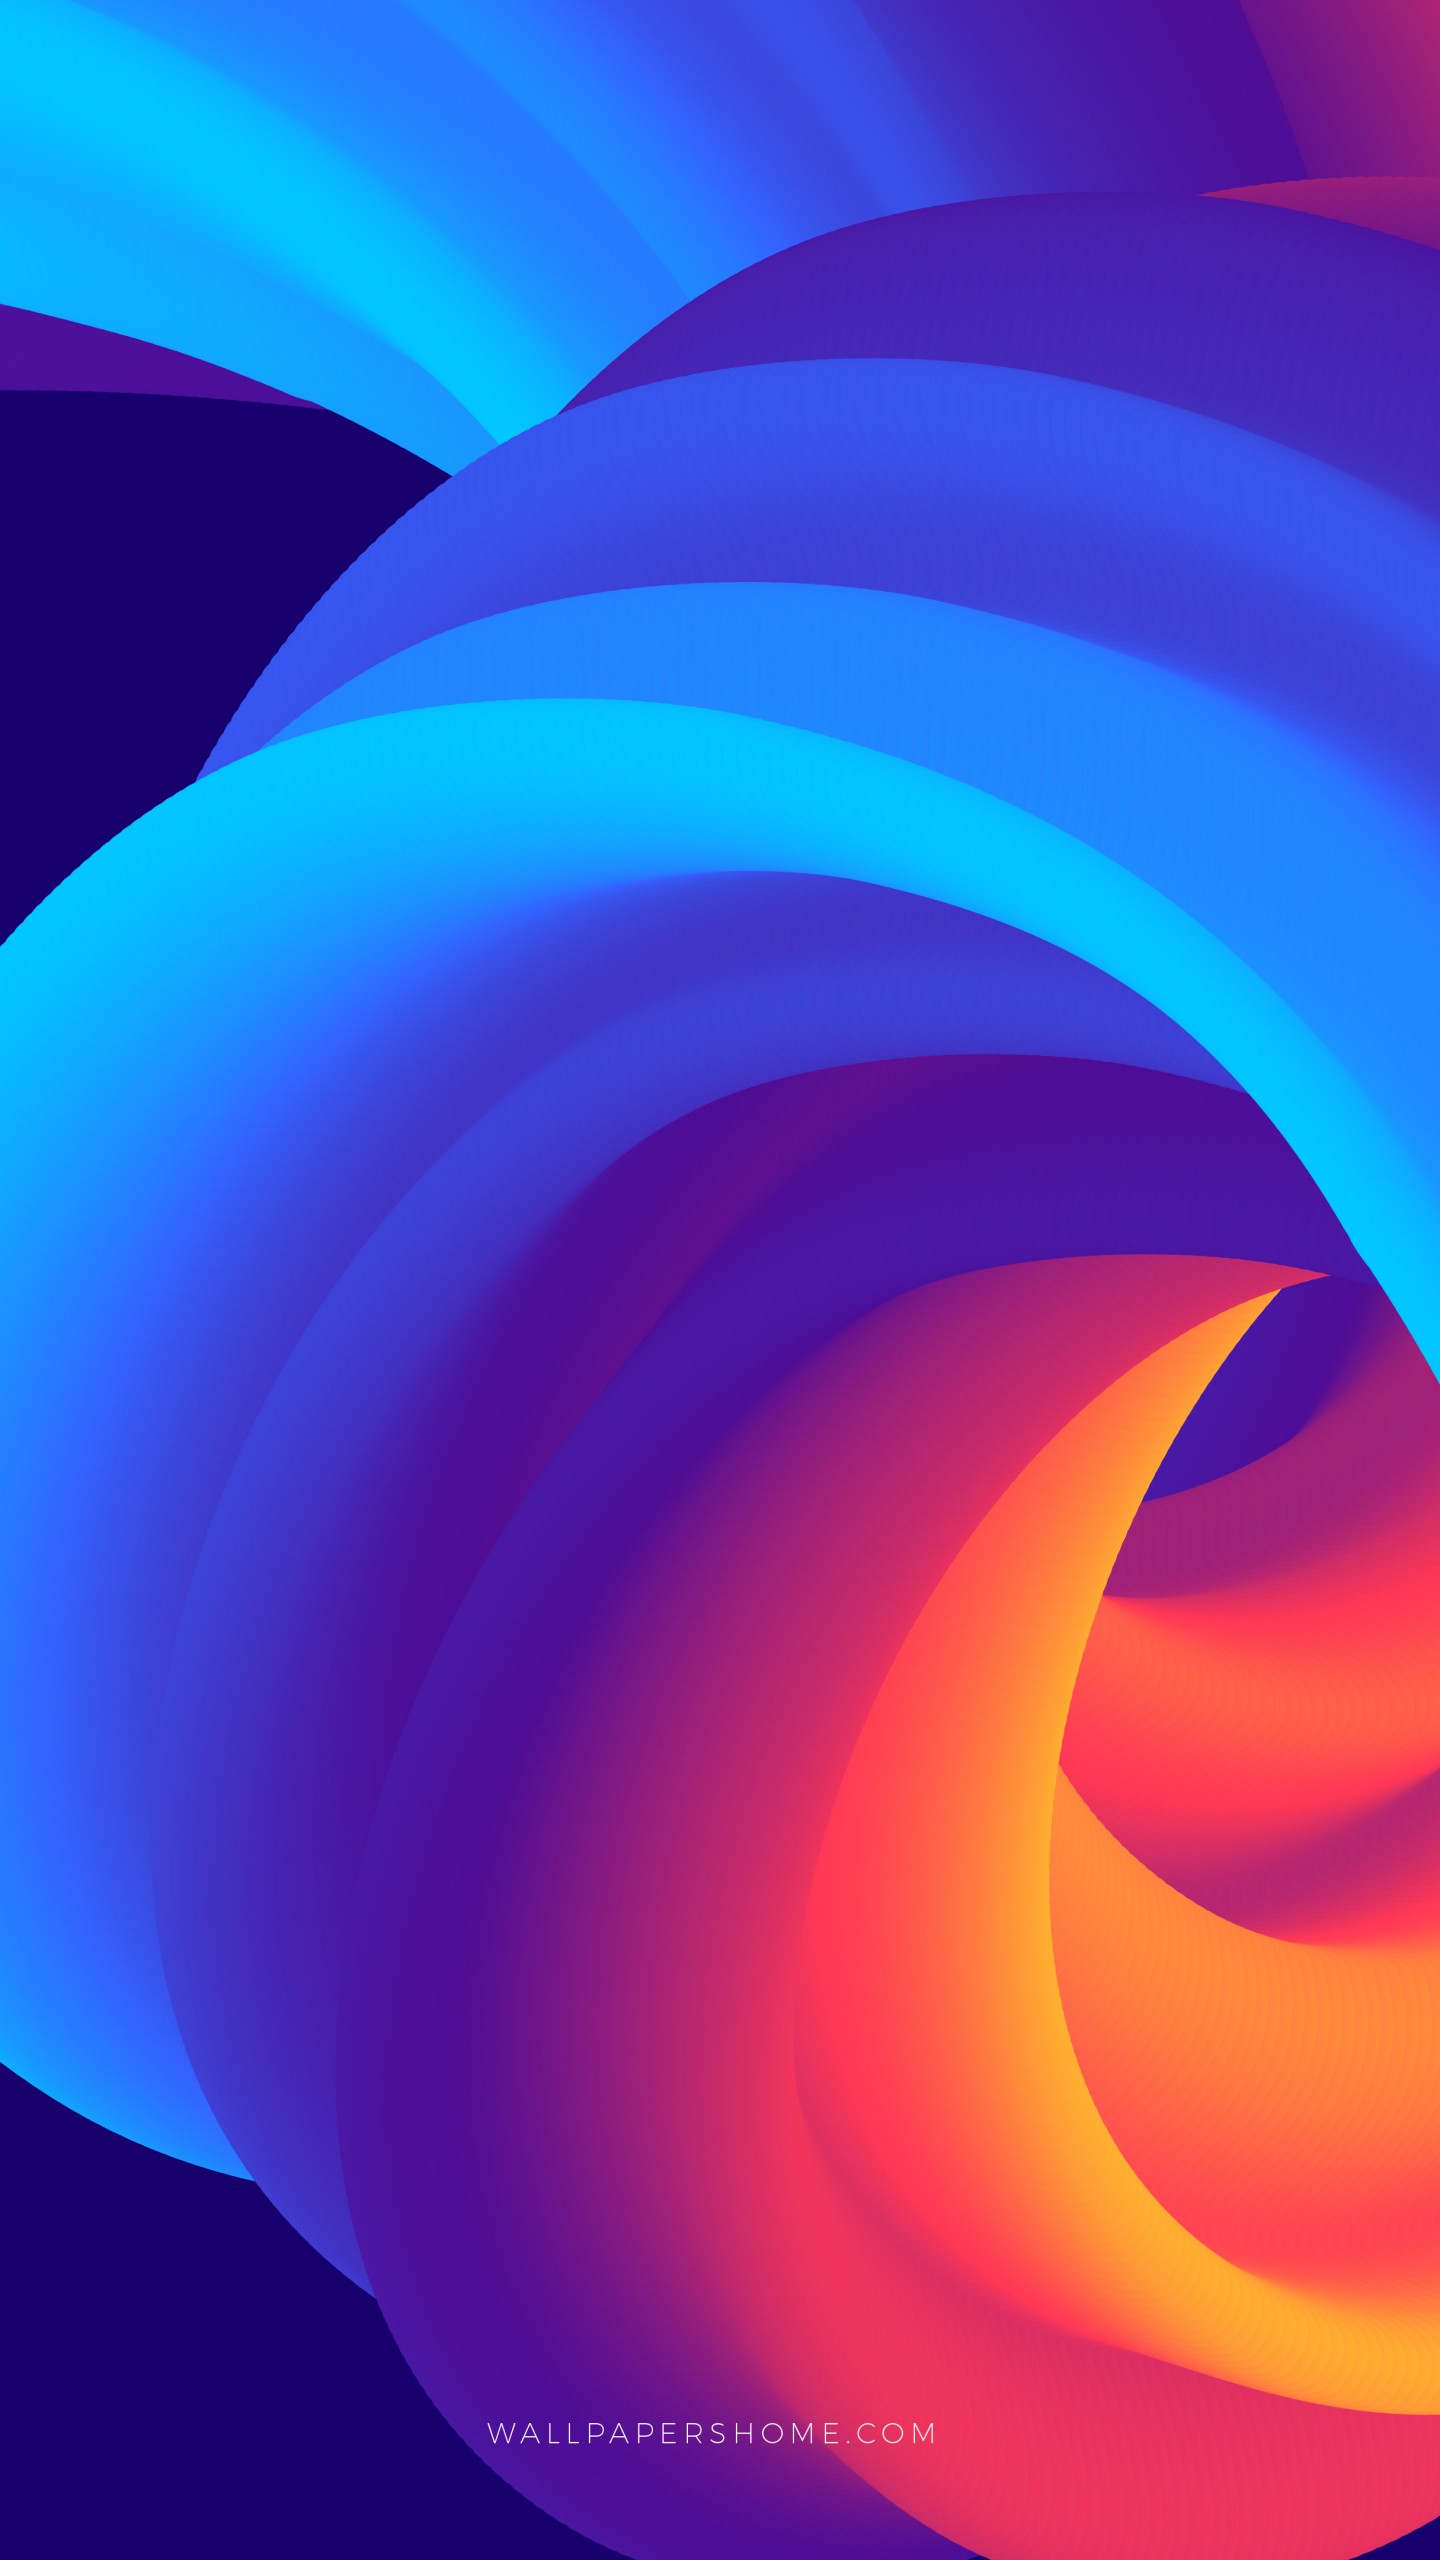 Wallpaper Abstract 3d Colorful 8k Os